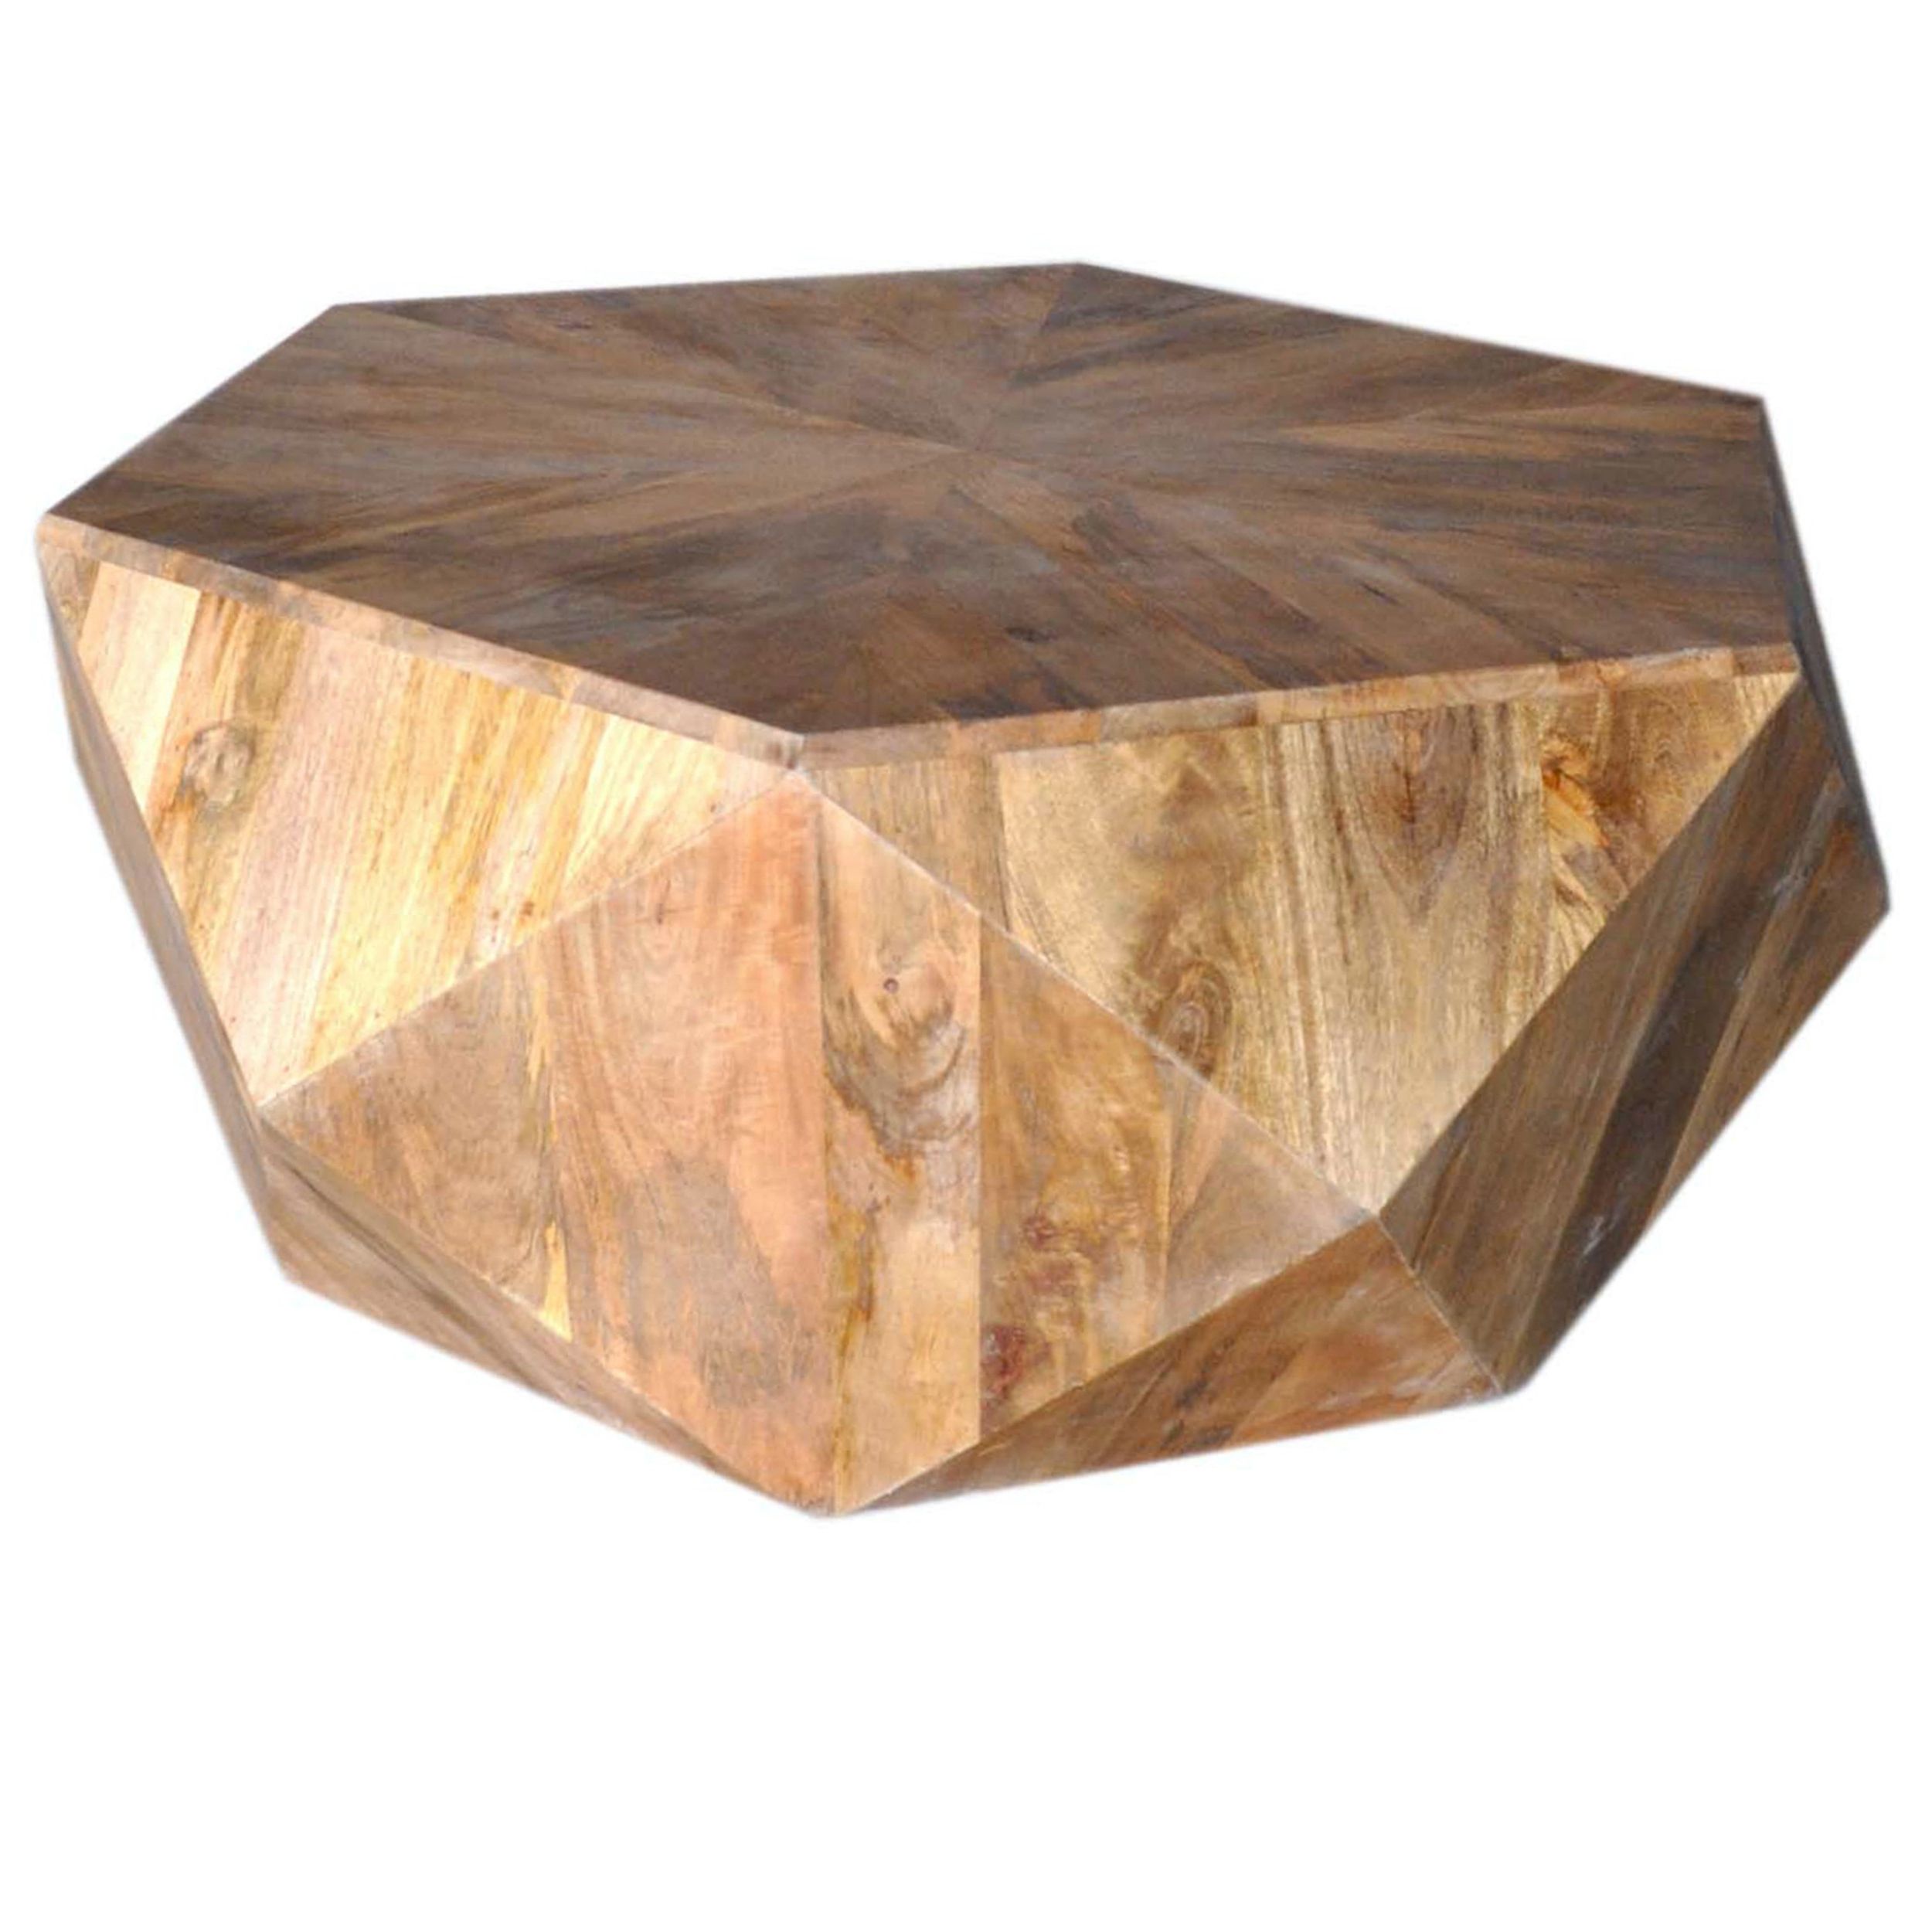 Fashionable Geometric Block Solid Coffee Tables Regarding Thorin Solid Wood Solid Coffee Table – Walmart (Gallery 19 of 20)